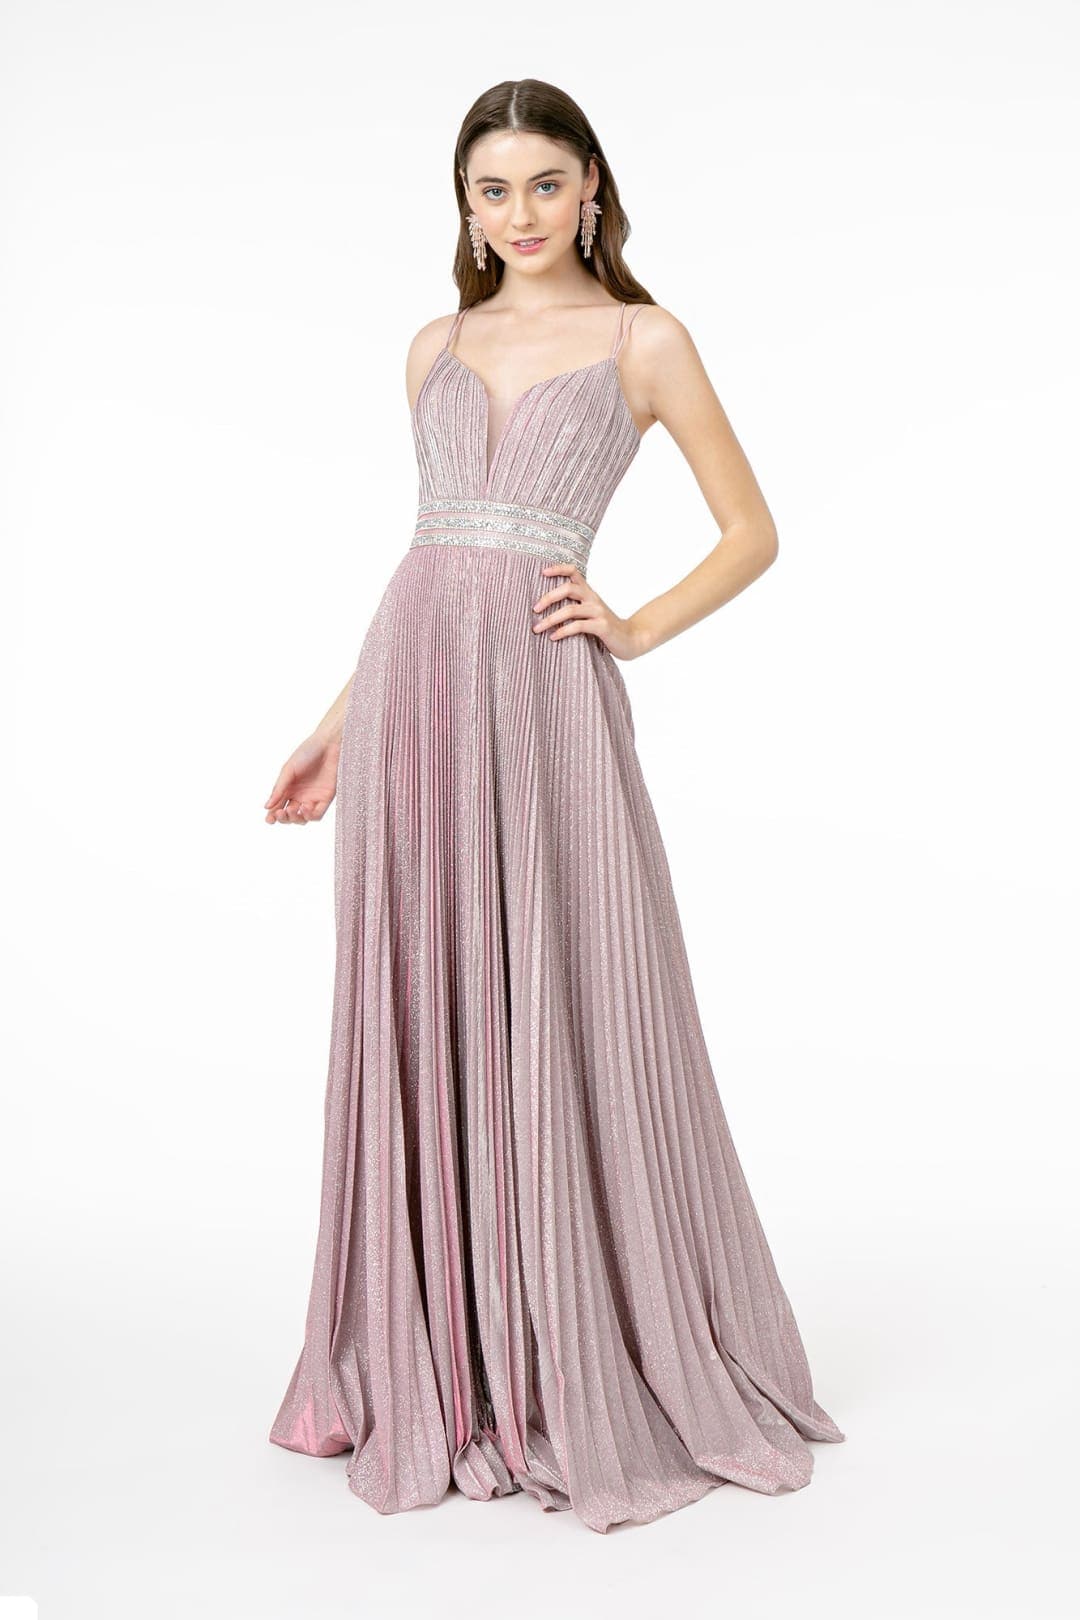 Prom Sparkly Formal Gown - DUSTY ROSE / XS